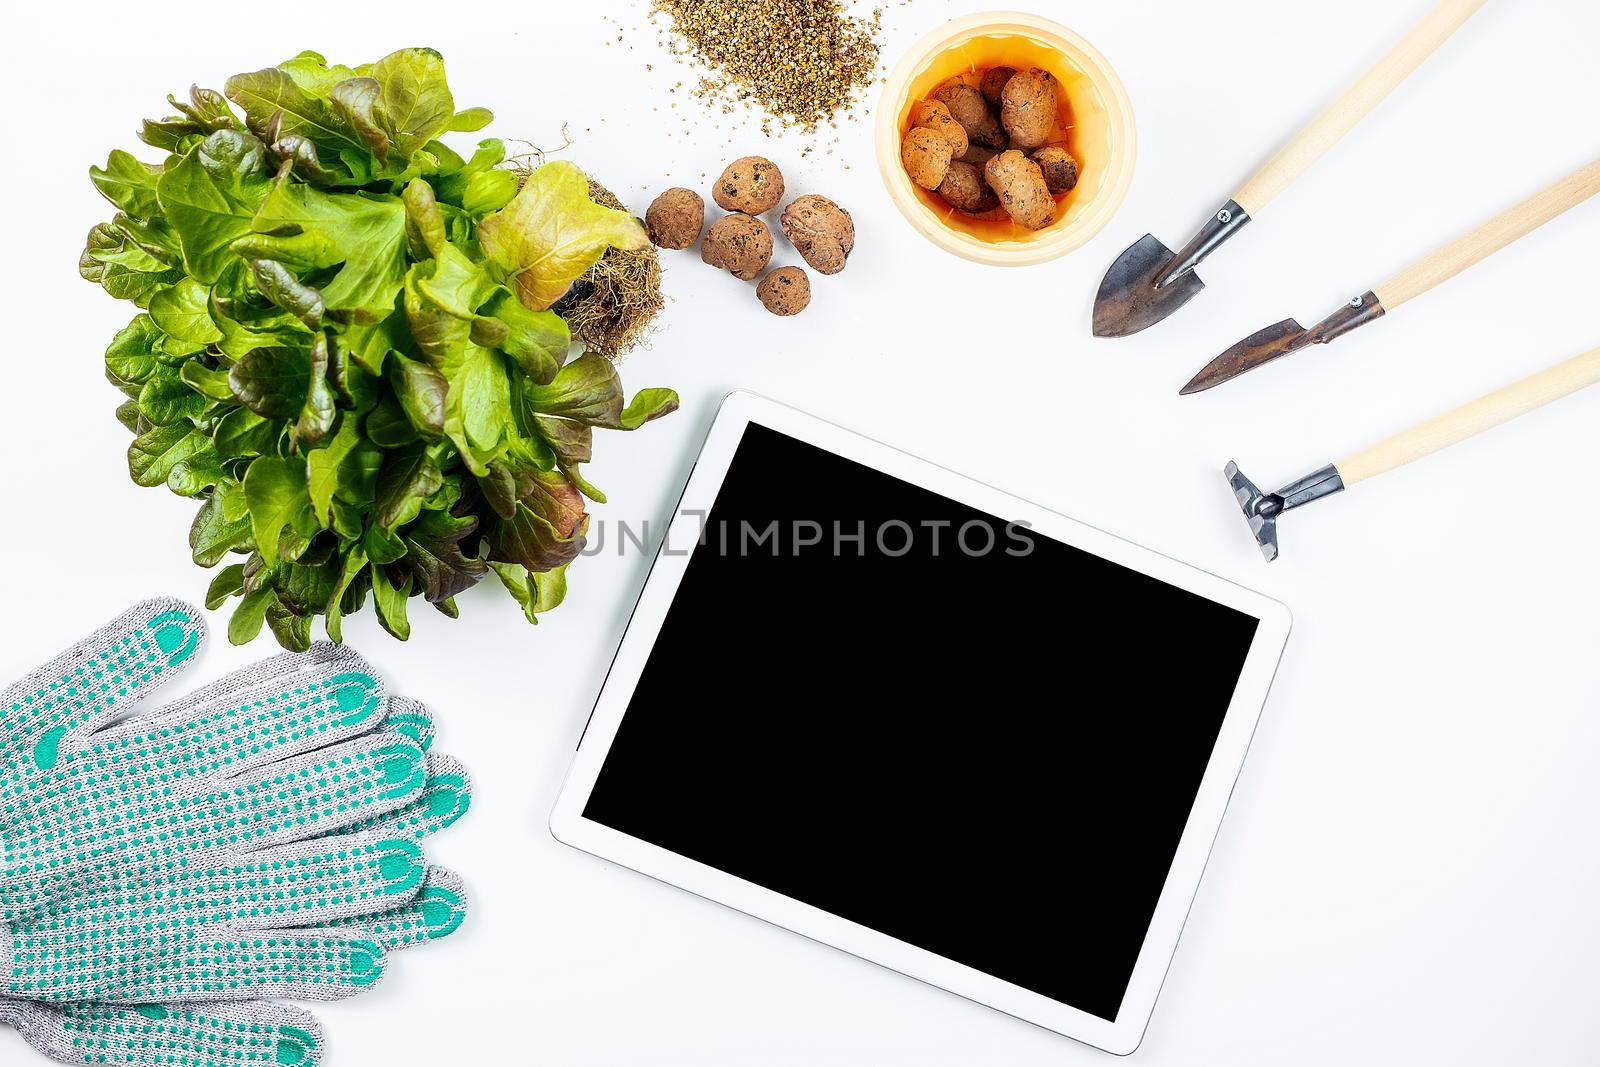 Home gardening concept, online training. On a white table are small tools for home gardening: shovels and rakes, garden gloves, expanded clay, a plant for transplanting, a tablet and flower pot.